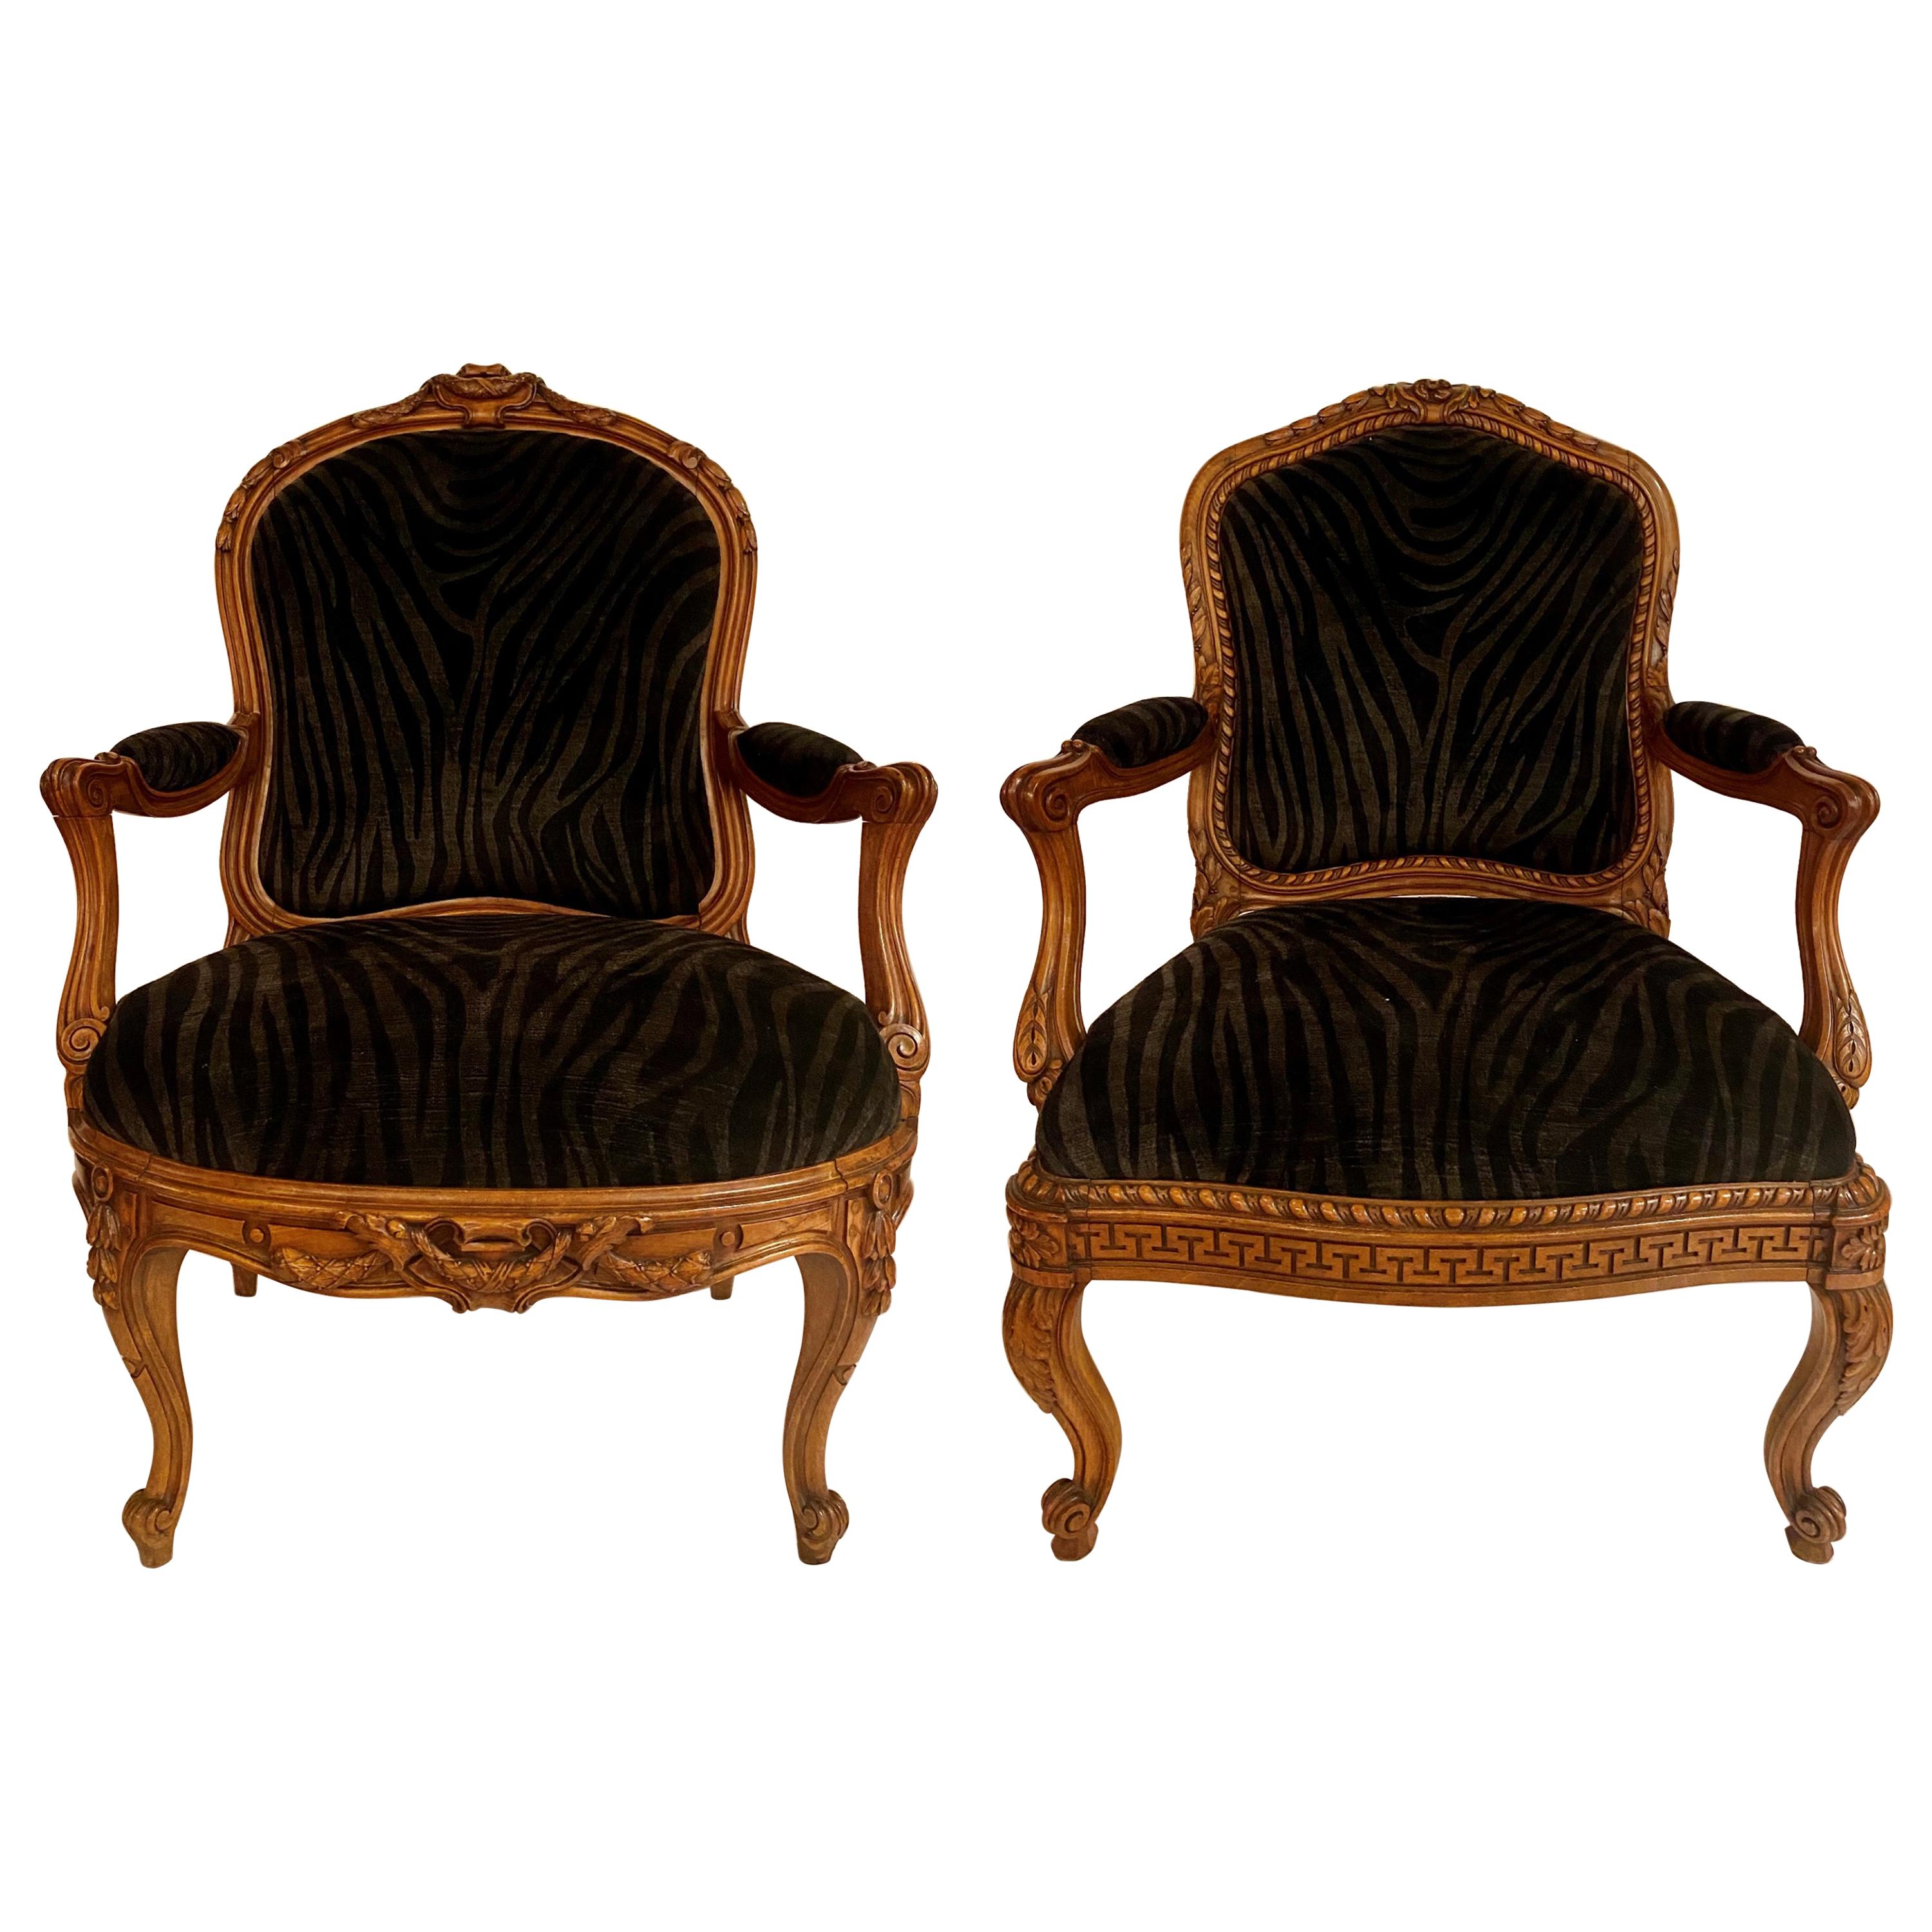 Near Pair of Antique French Carved Walnut Armchairs, circa 1890